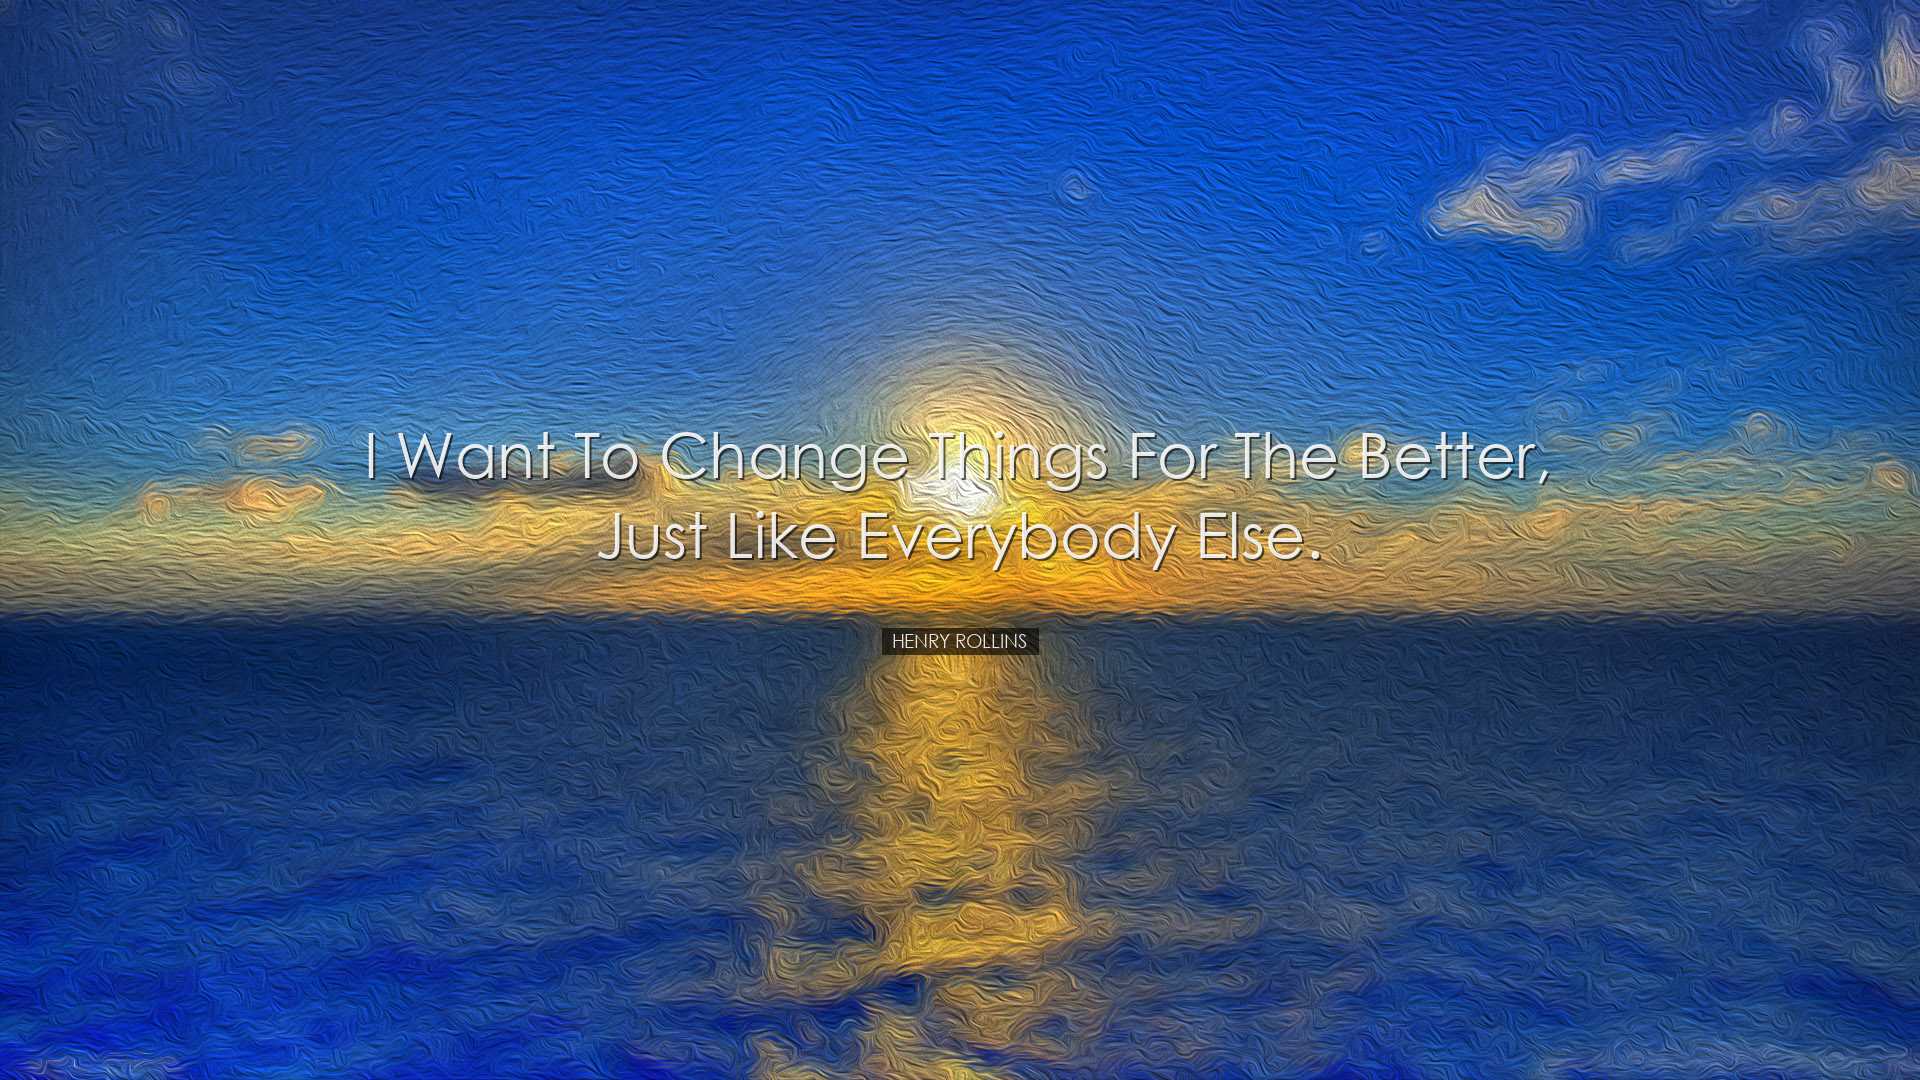 I want to change things for the better, just like everybody else.